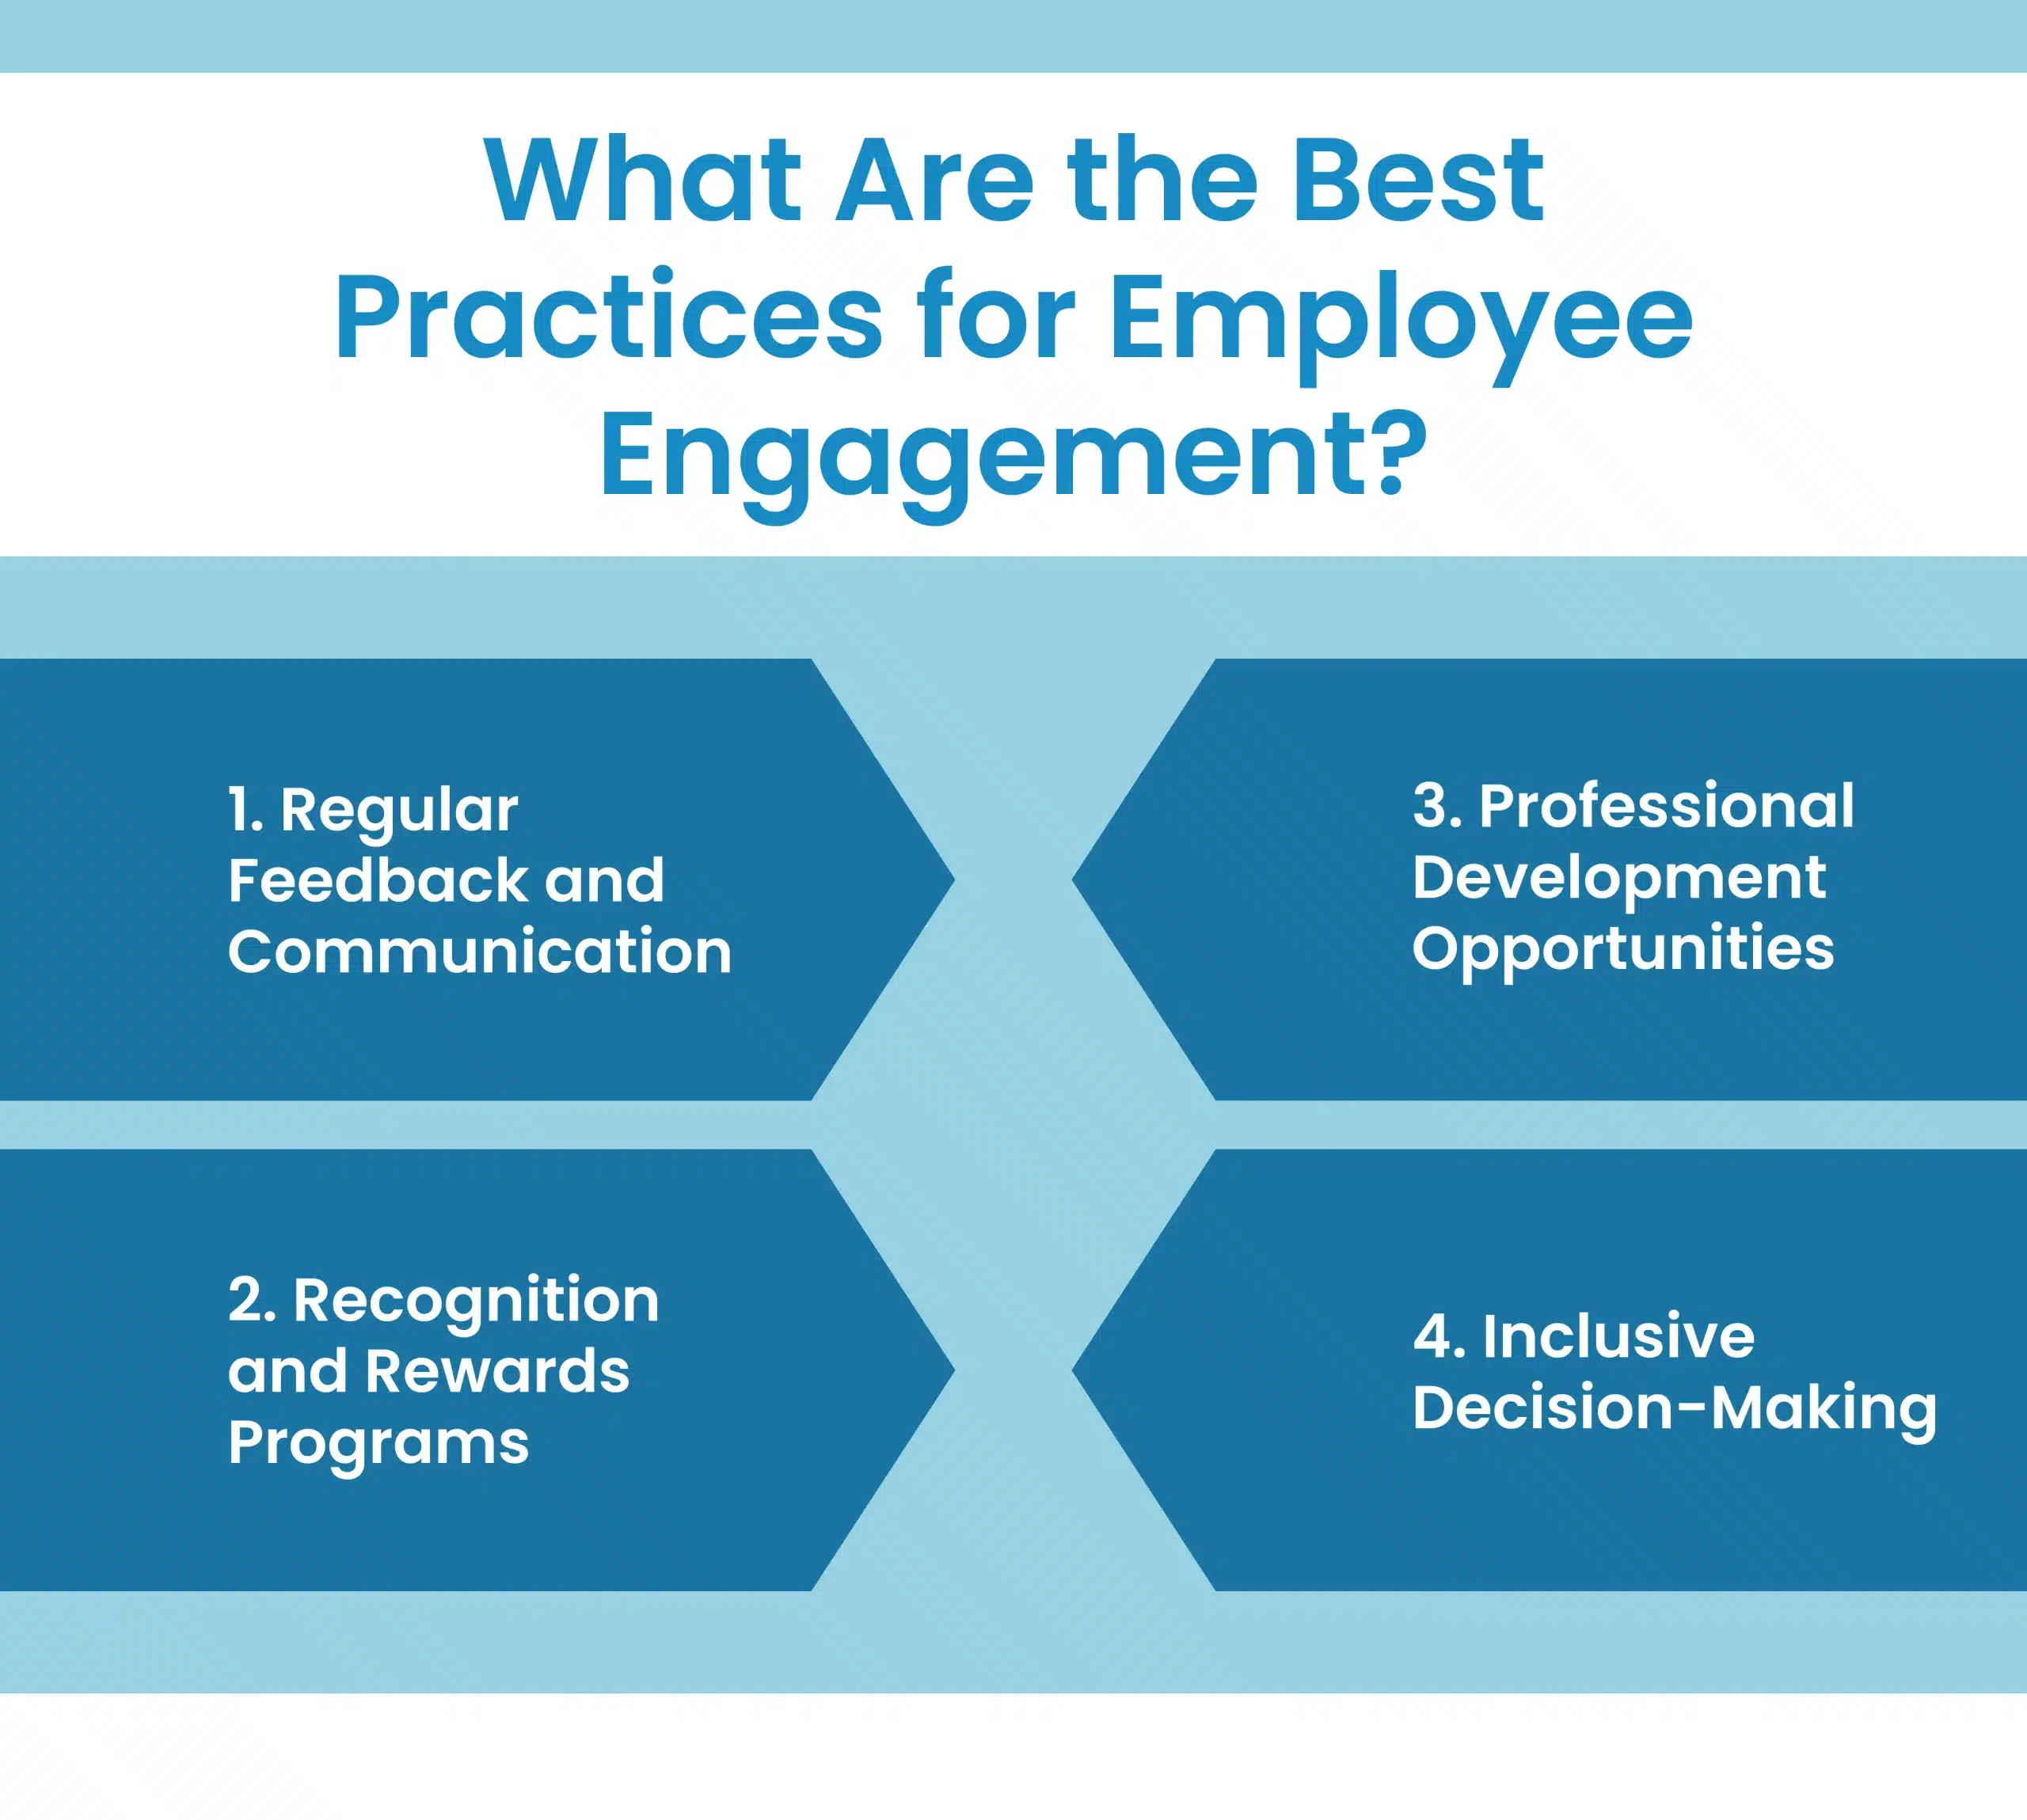 What Are the Best Practices for Employee Engagement